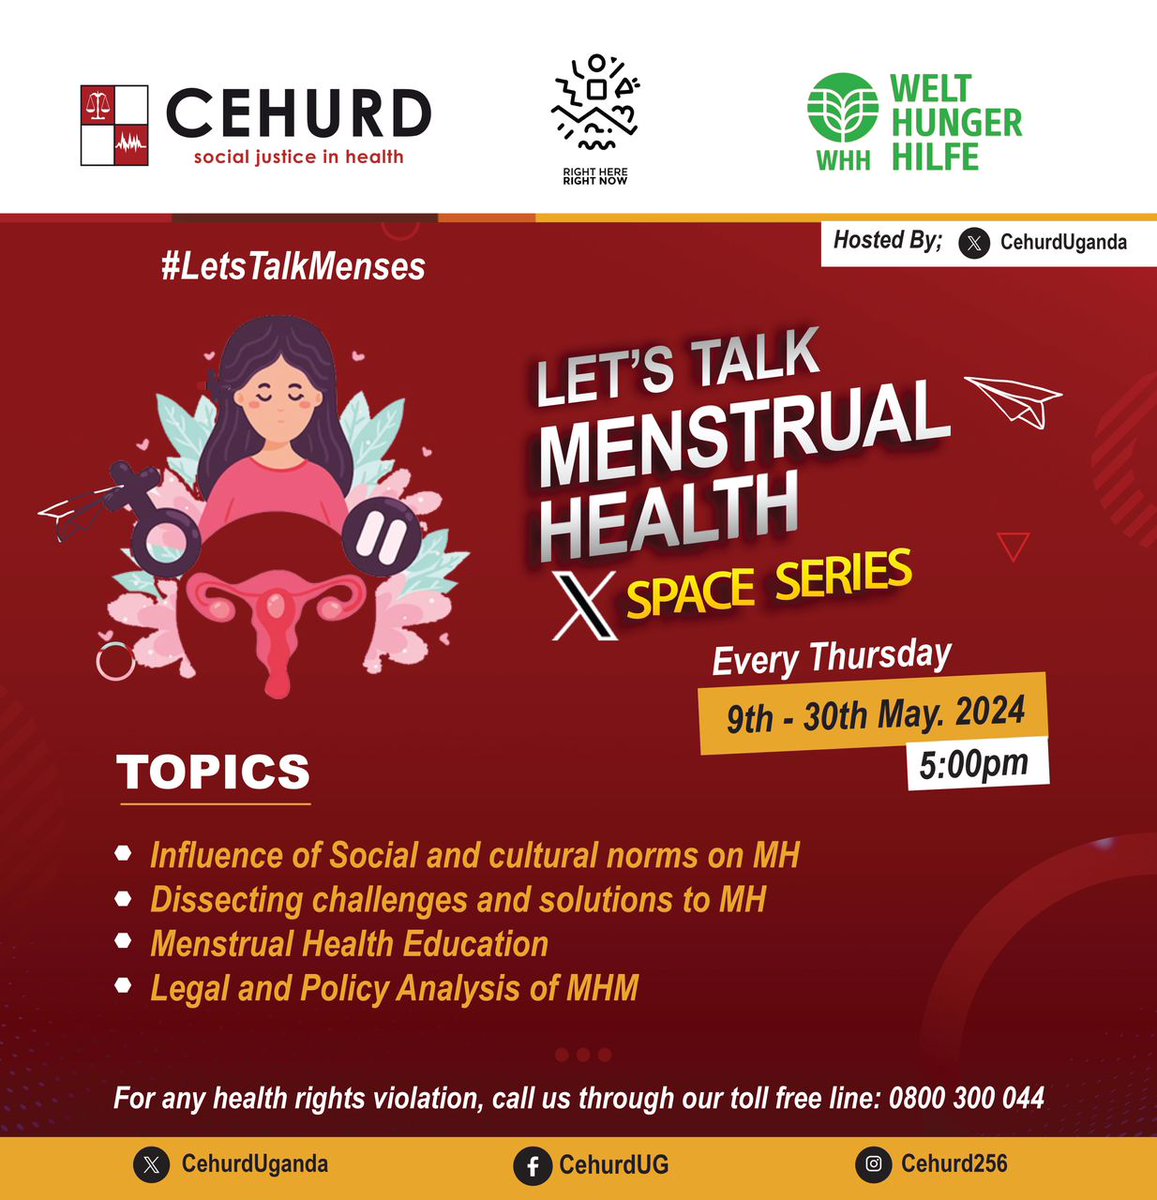 Did you know that 2.3 billion girls and women across the globe face challenges in managing menstruation? In recognition of Menstrual Hygiene Month, don't forget to Join our partner @cehurduganda for the X-Spaces series every Thursday throughout the month of May. *Don't Miss